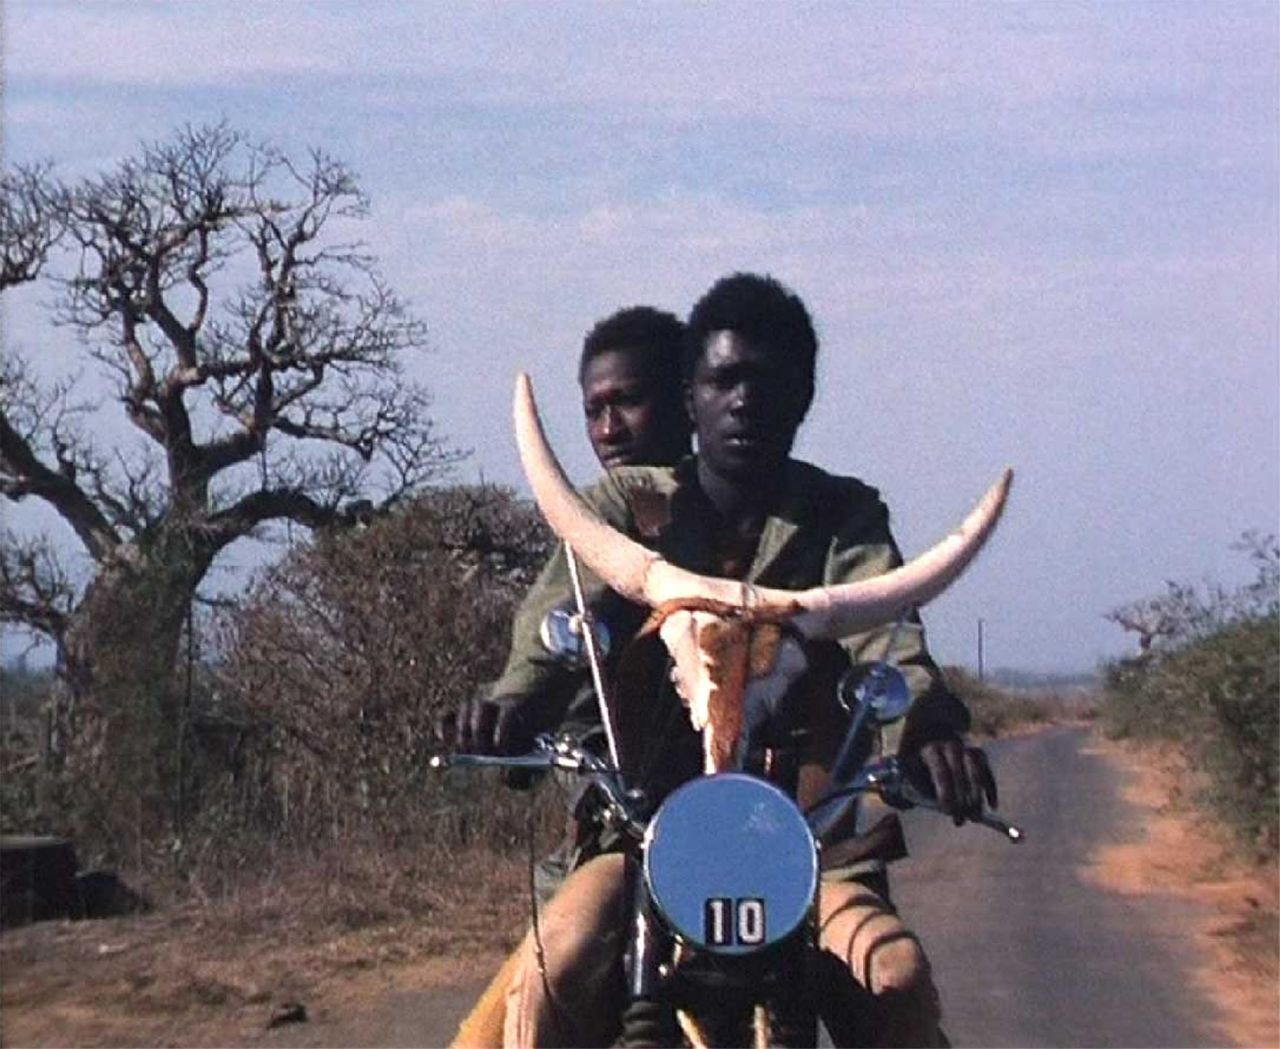 A still from "Touki Bouki" (1972), directed by Djibril Diop Mambety, Mati Diop's uncle.